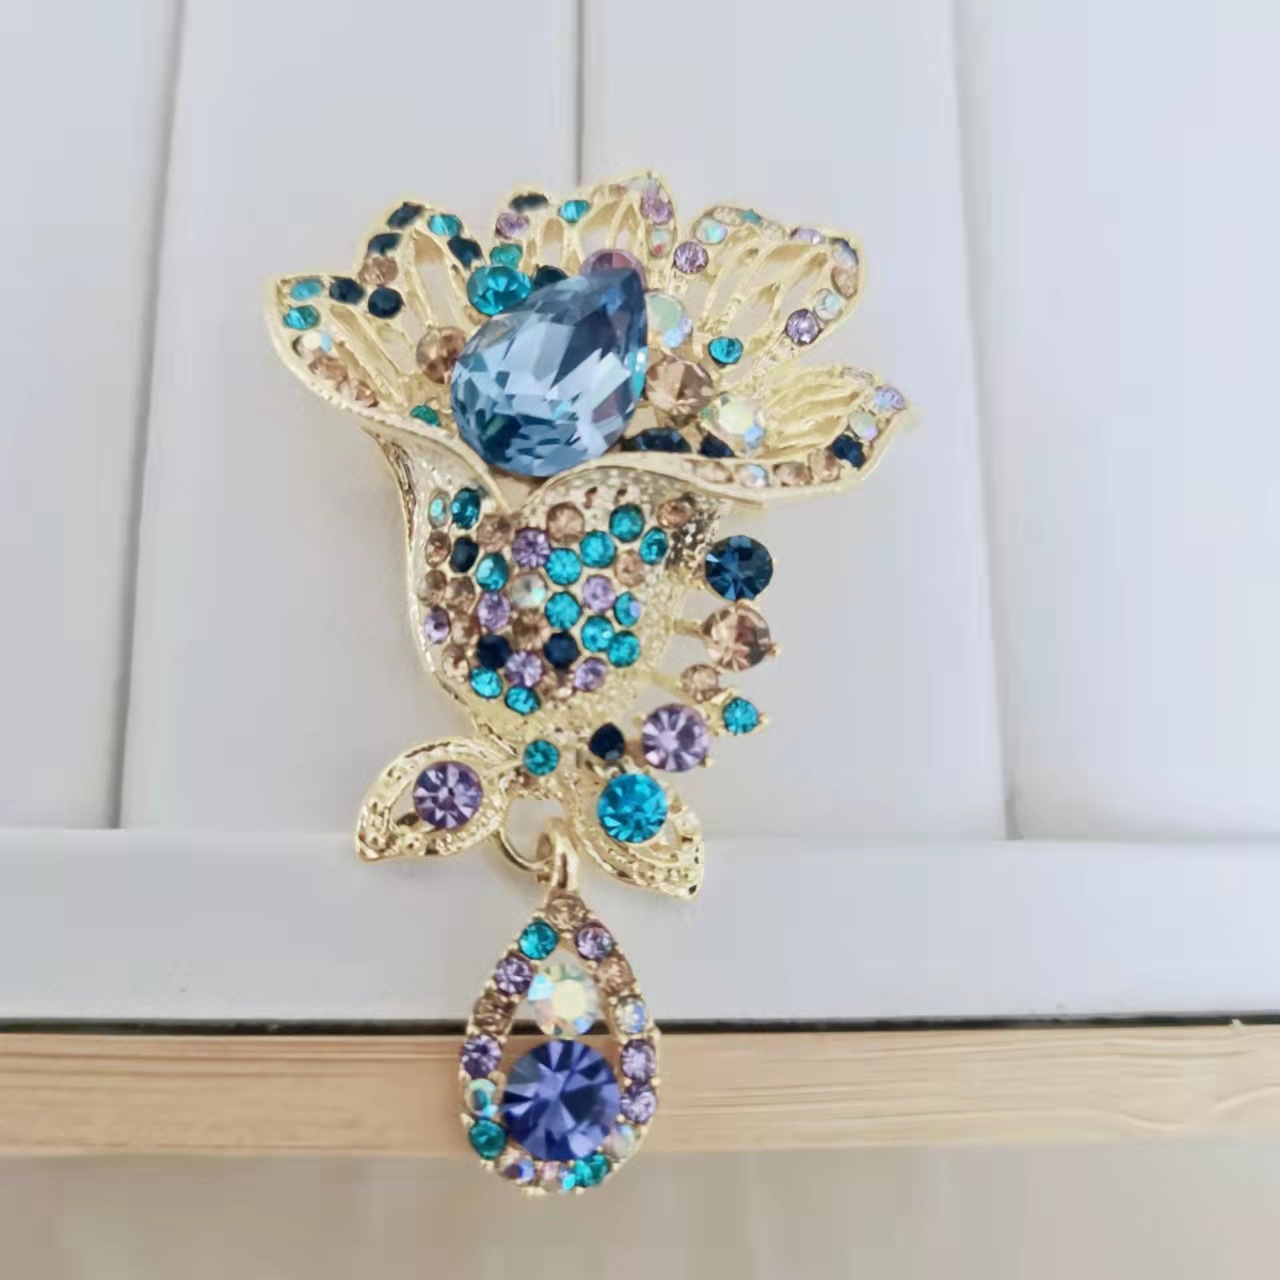 New Luxury Jewelry Crystal Flower Brooch Pins for Women Fashion Vintage Dinner Dress Corsage Pin Silk Scarf Buckle Clothing Accessories Brooches